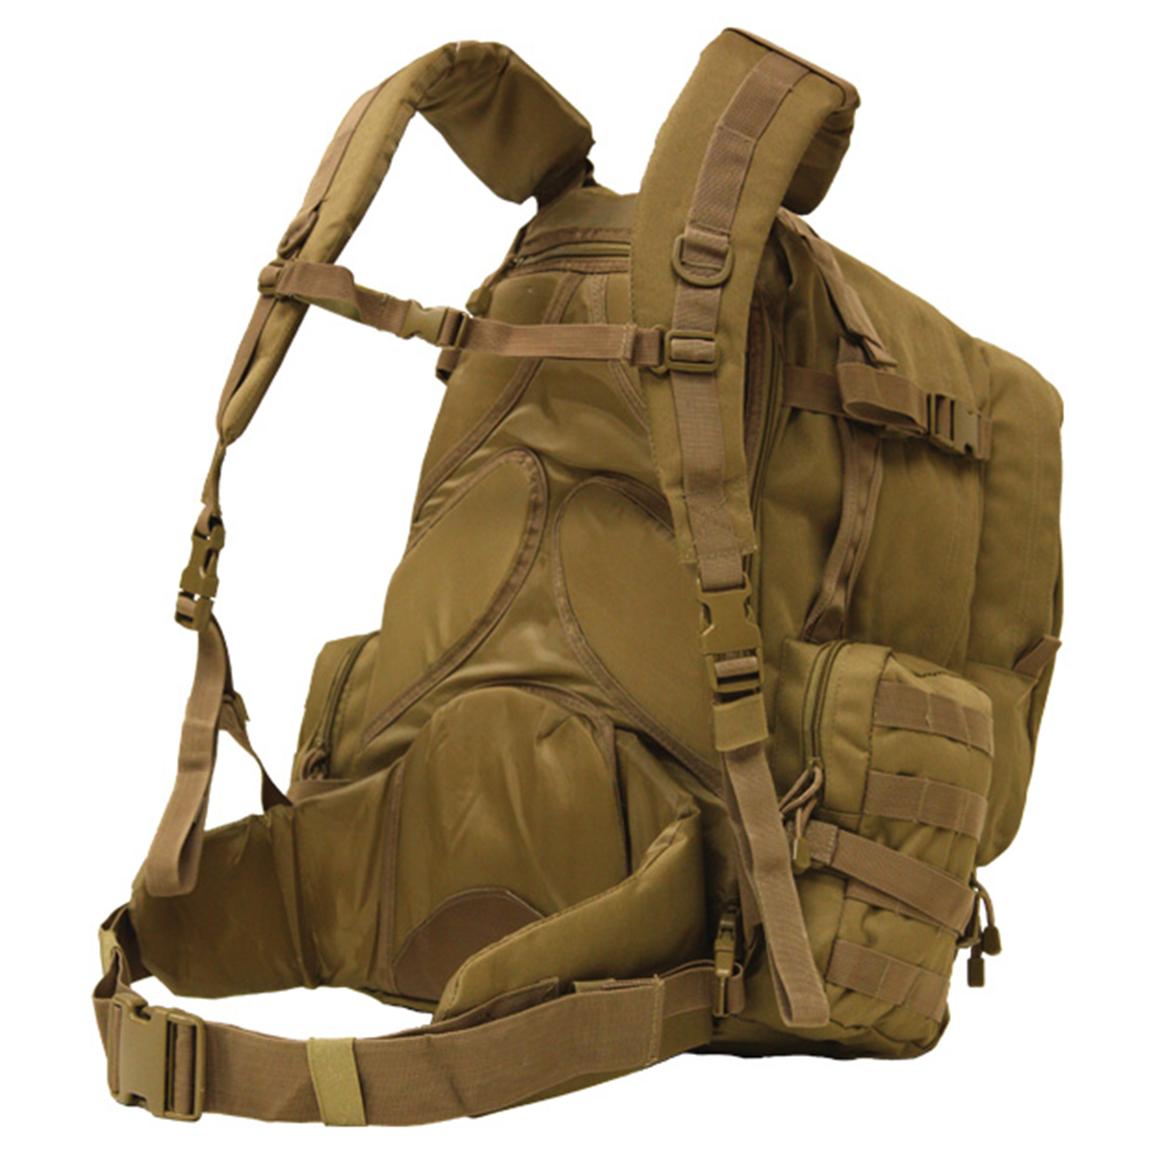 Red Rock Outdoor Gear™ Diplomat Backpack - 299865, Military Style Backpacks & Bags at Sportsman ...